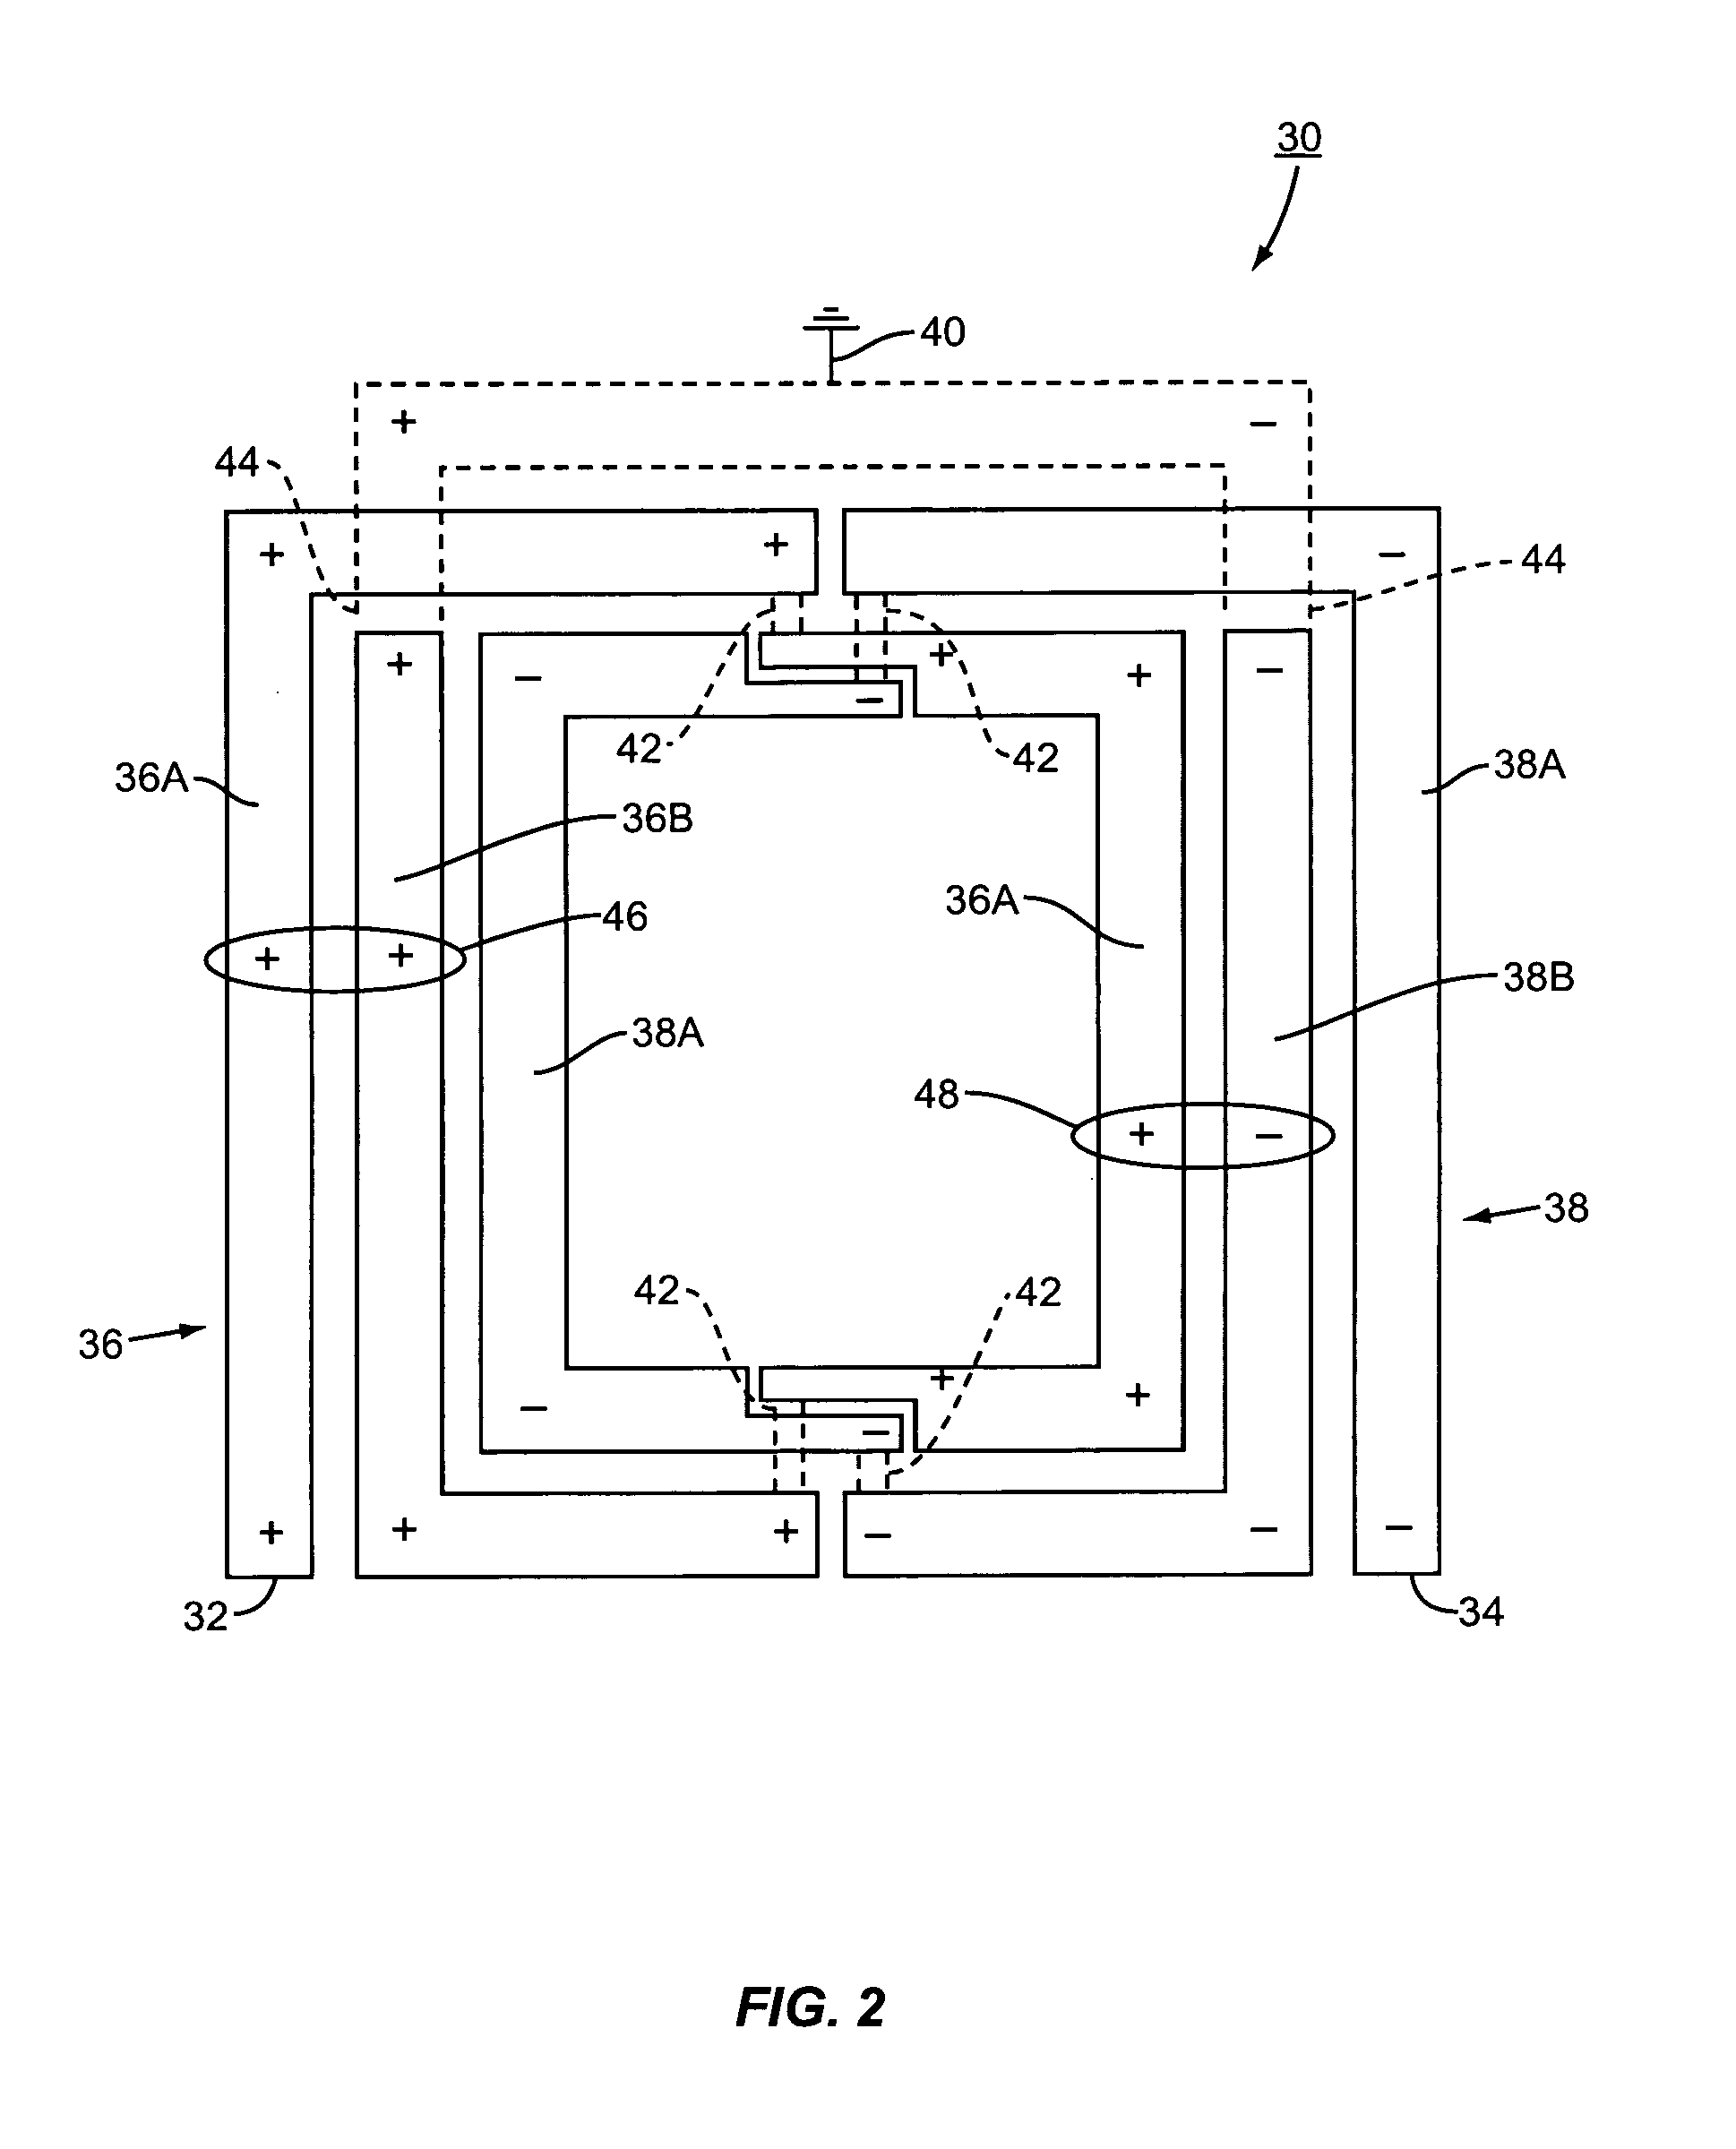 Method of constructing a differential inductor